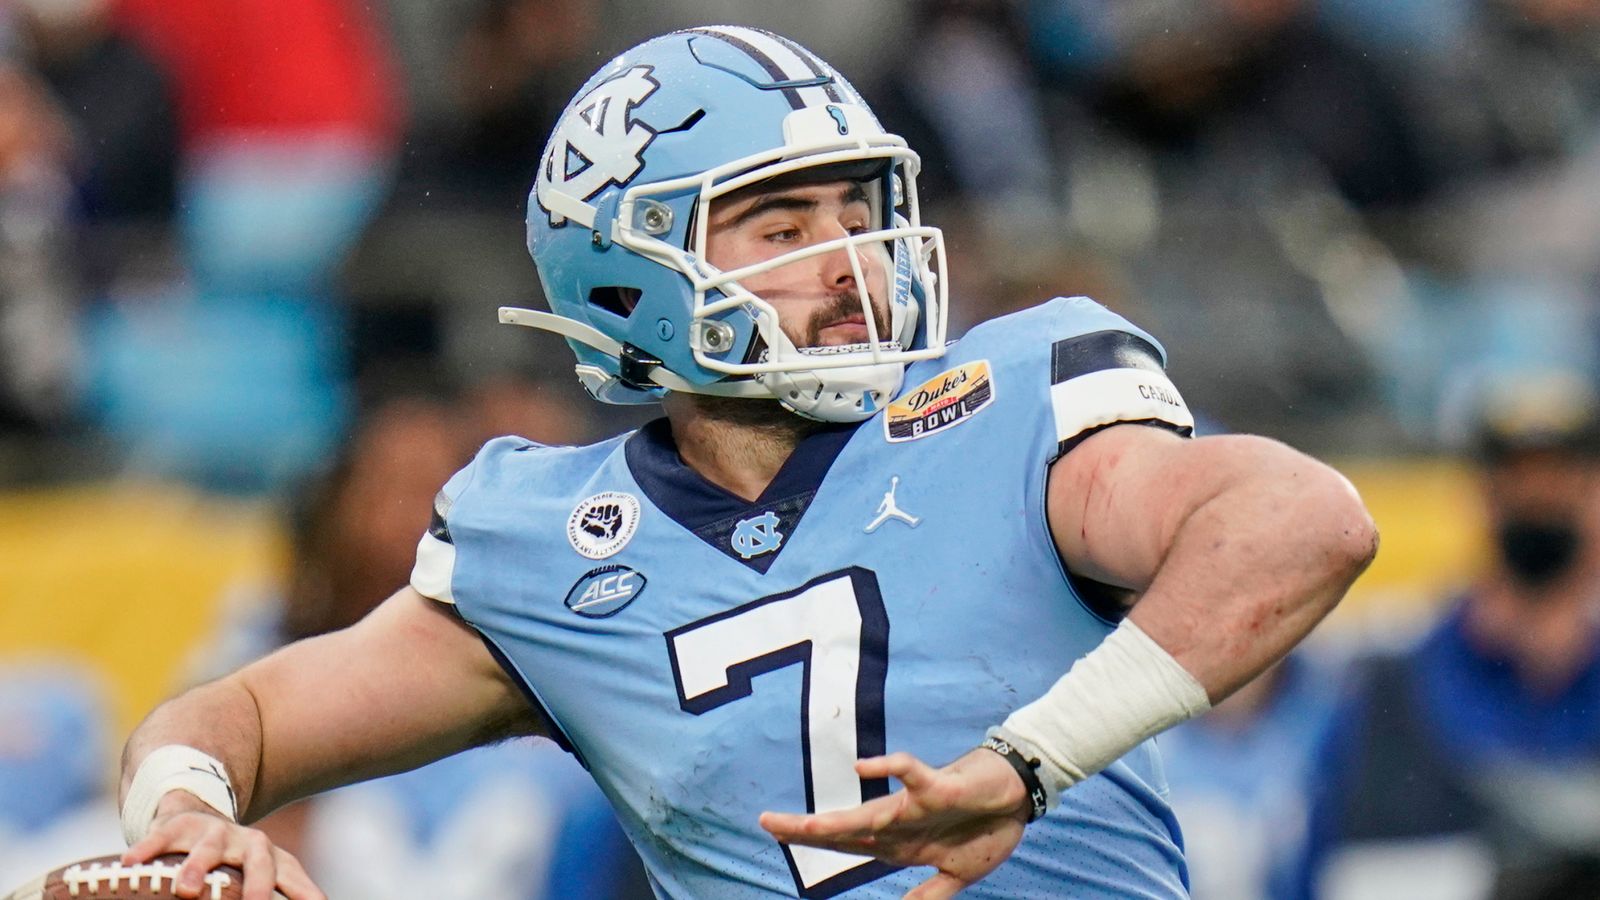 Sam Howell reminds us why he's the No. 1 pick in the 2022 NFL Draft